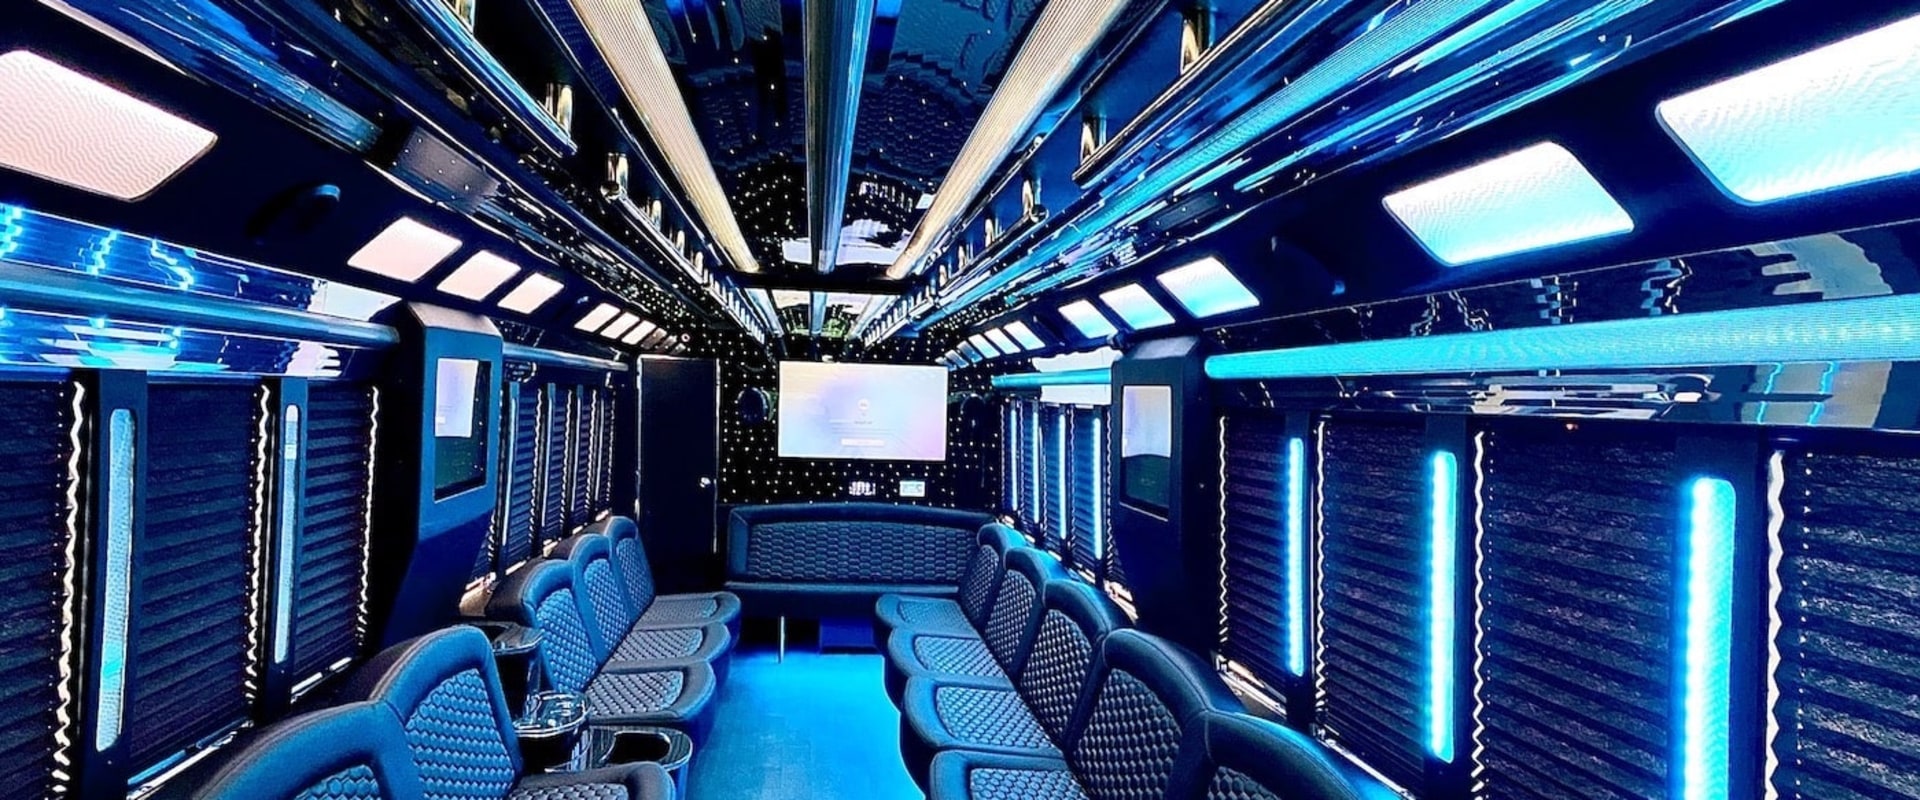 How much is a party bus in orange county?